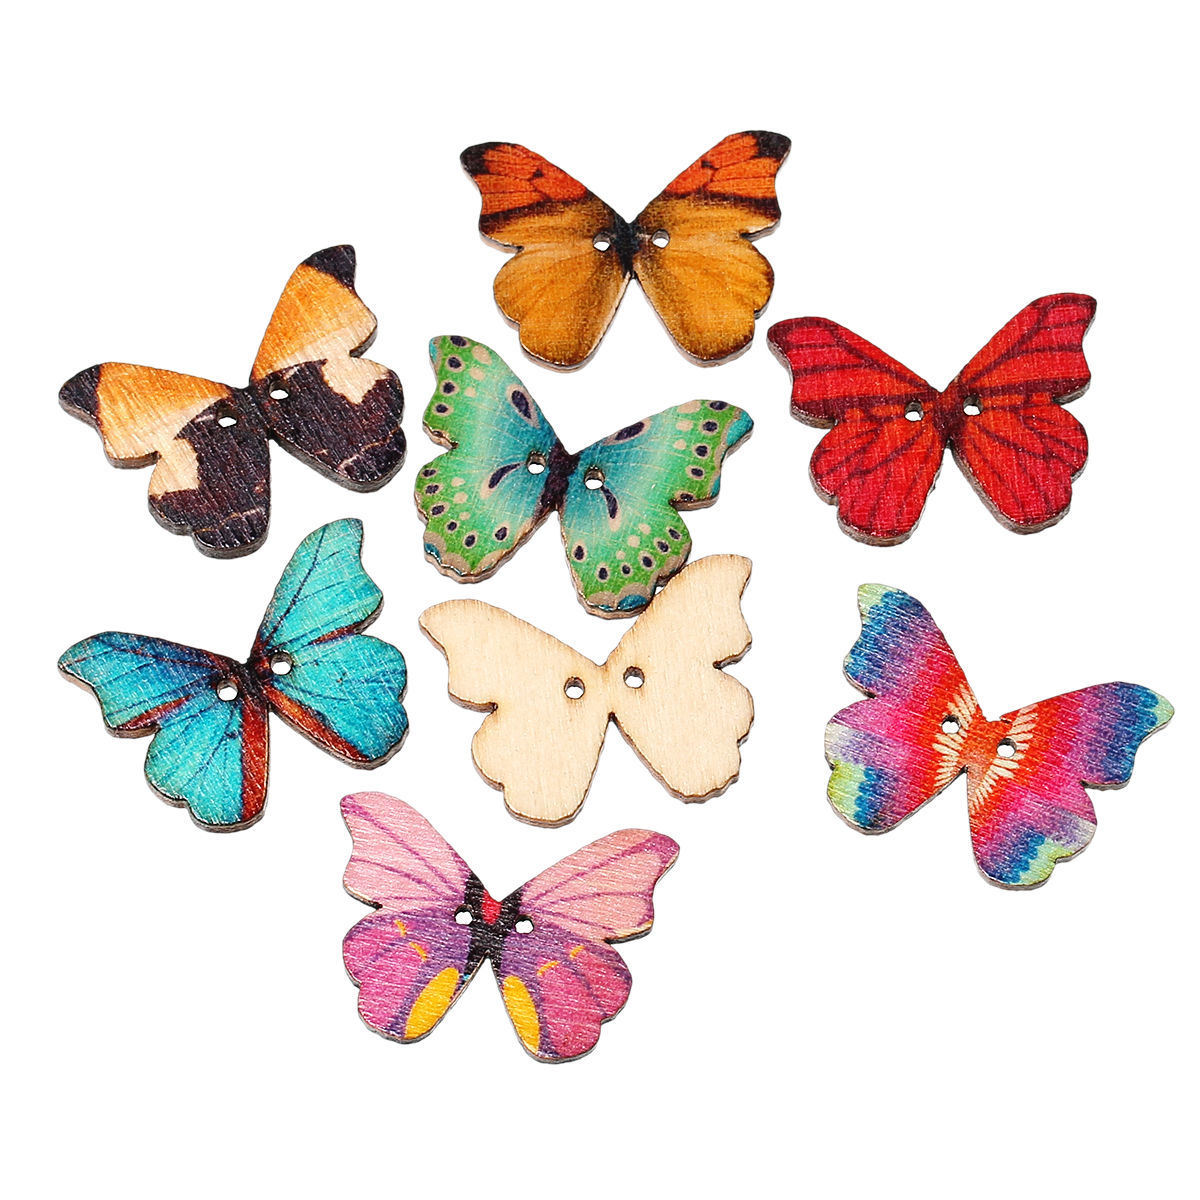 Picture of Wood Sewing Buttons Scrapbooking 2 Holes Butterfly At Random 28mm(1 1/8") x 21mm( 7/8"), 50 PCs